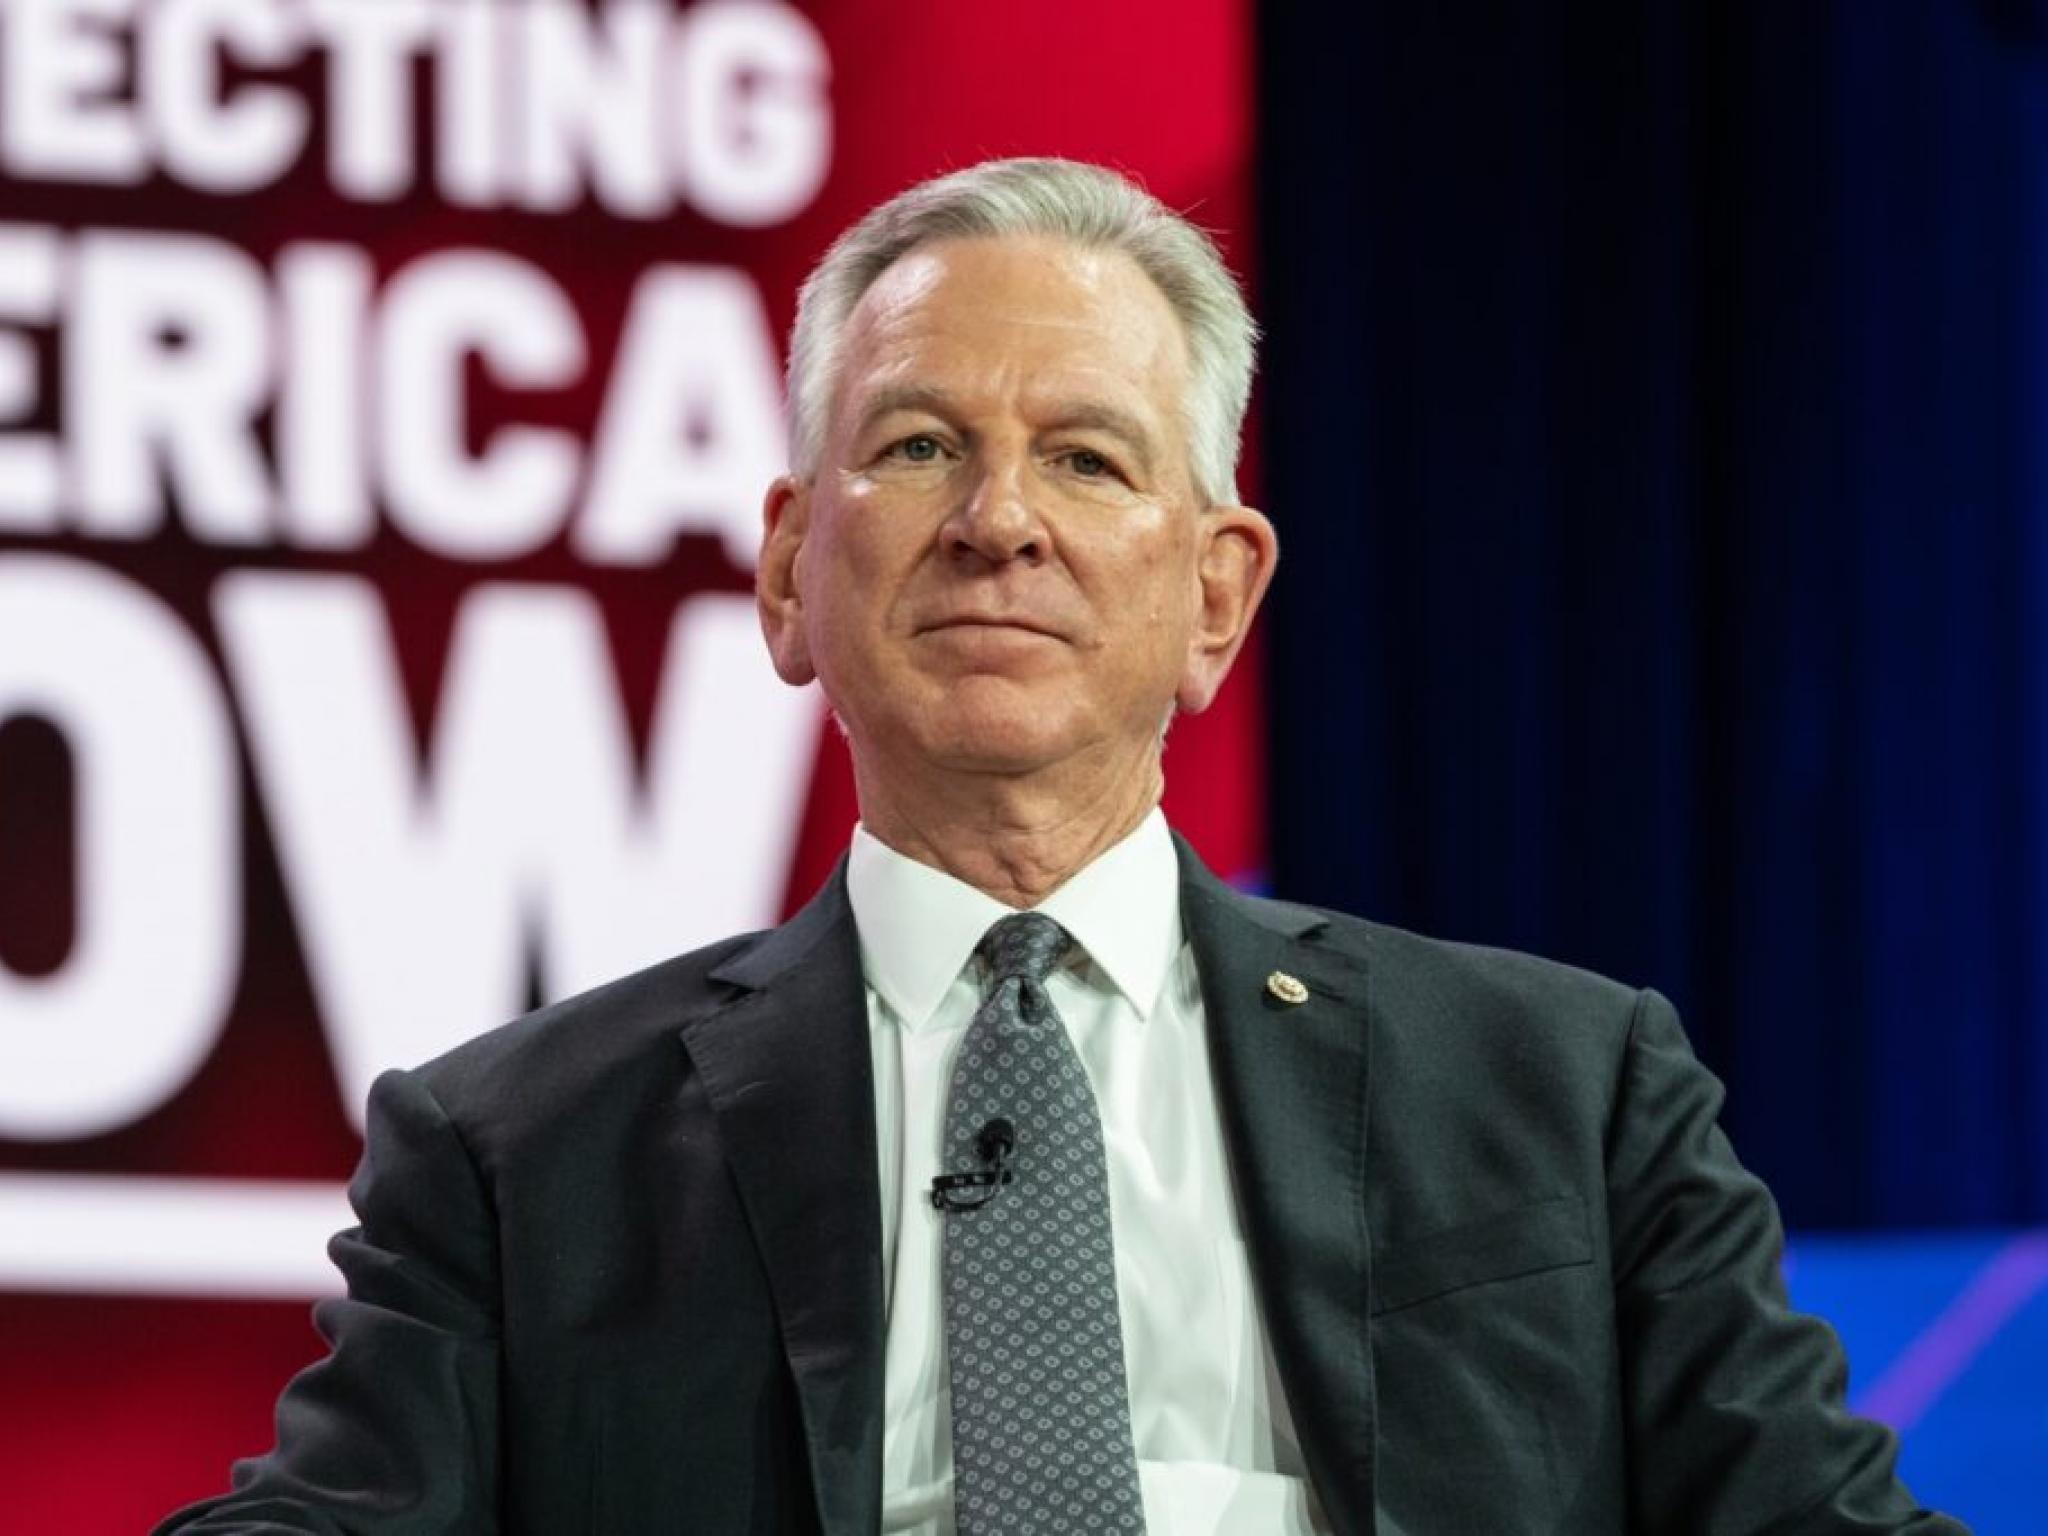  tommy-tuberville-trades-raise-eyebrows-again-senator-sells-put-options-buys-small-biotech-linked-to-ukraine-russia-war 